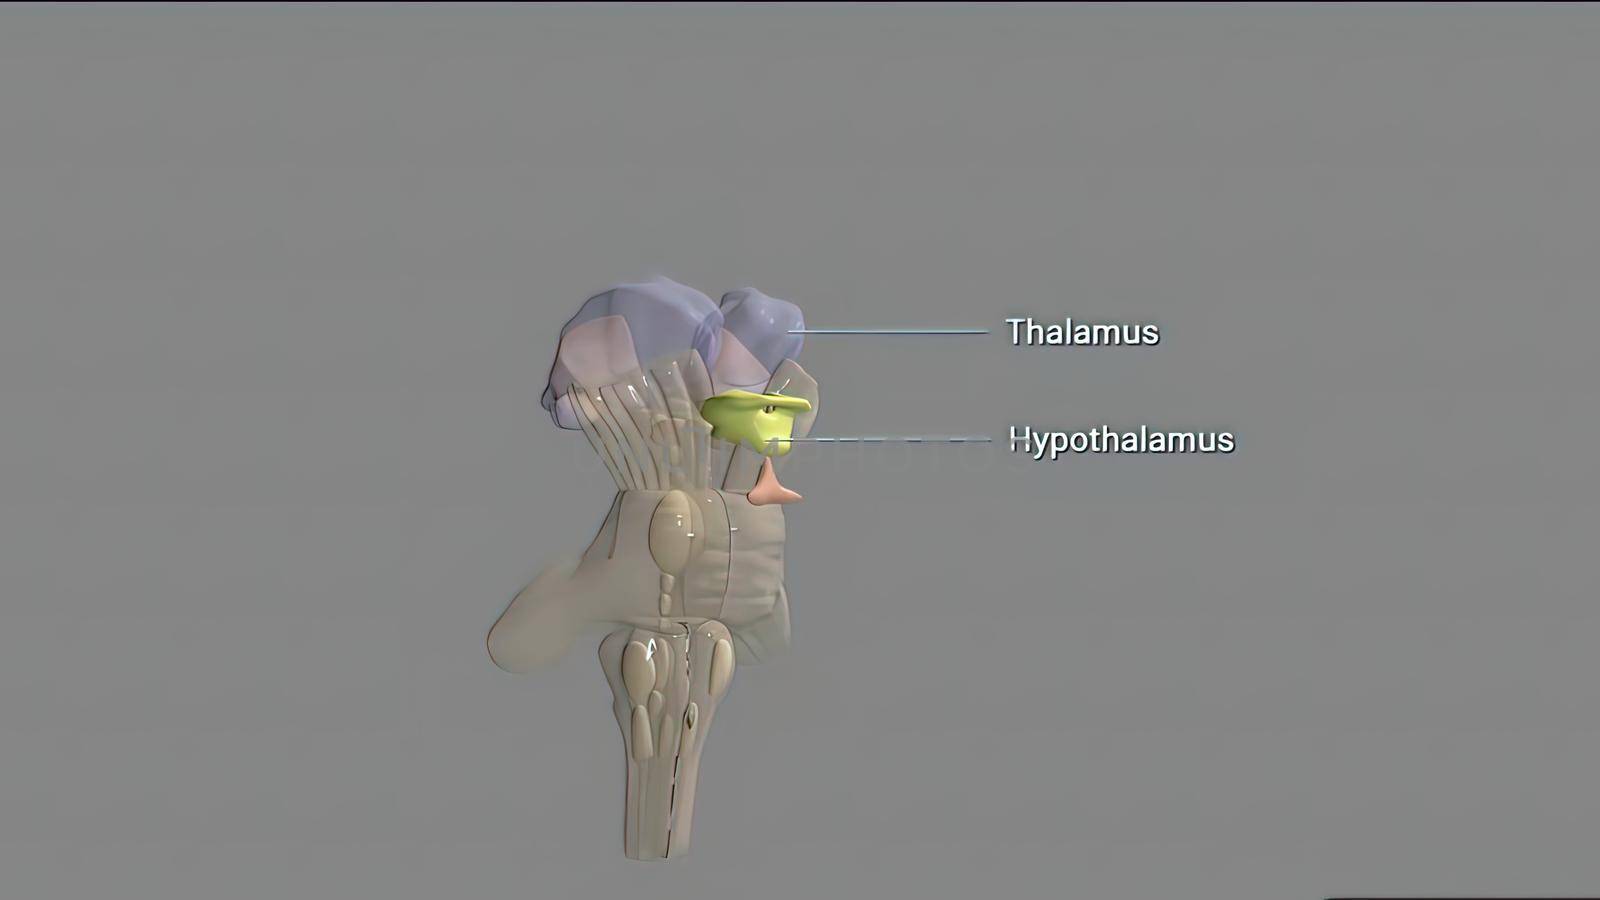 The midbrain or mesencephalon is the forward-most portion of the brainstem 3d illustration